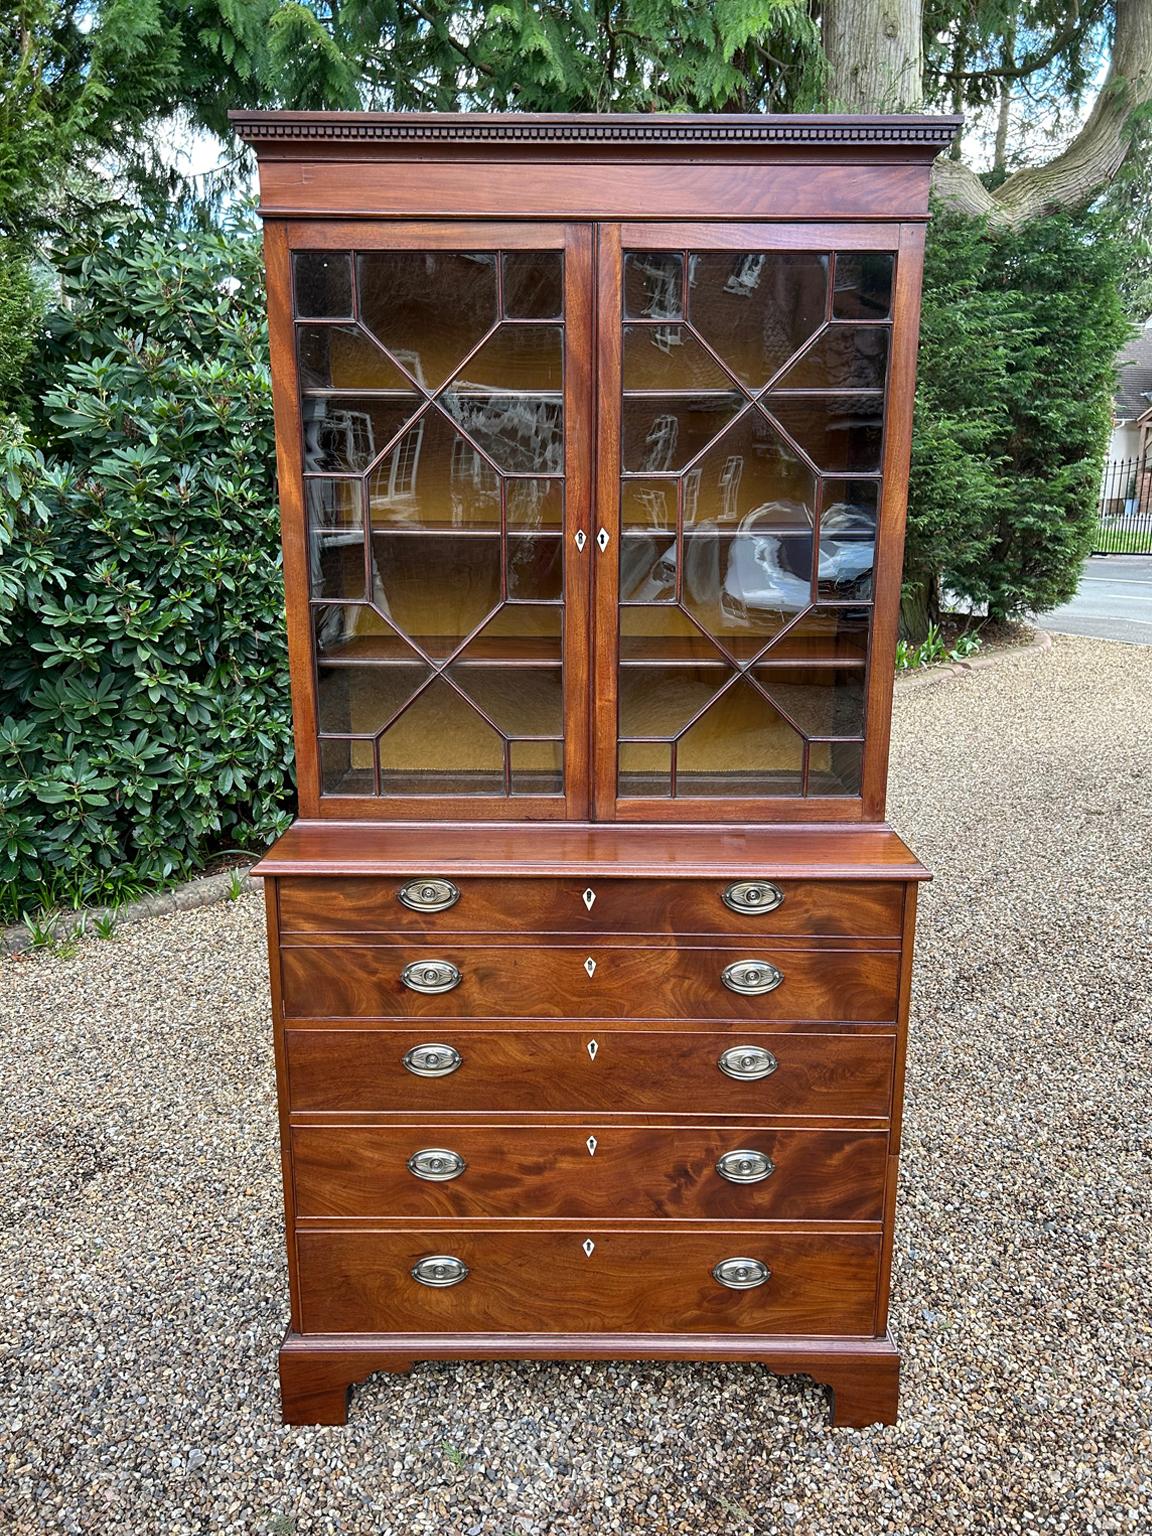 A high quality 18h century Georgian Mahogany Secrétaire Bookcase. The upper section with a shaped cornice, fitted adjustable shelves enclosed by astragal glazed doors. The Chest is fitted with a pullout secretaire drawer which incloses a fitted